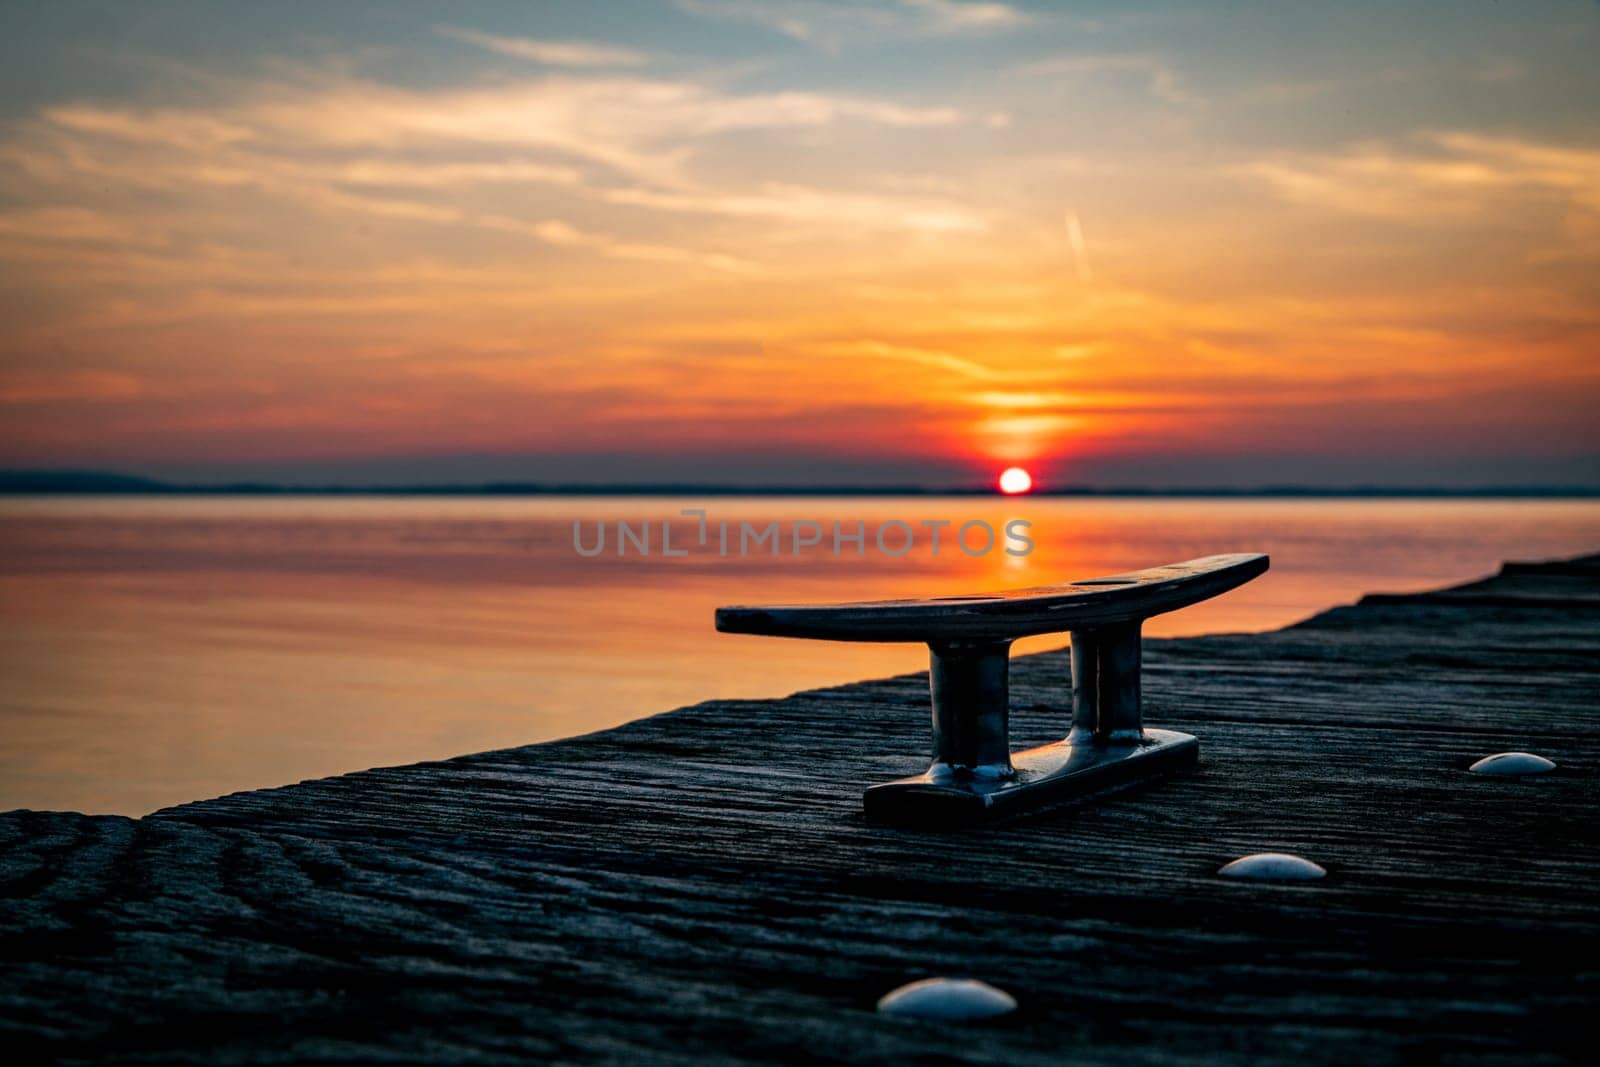 a steel mooring rope on the quay during sunset with the sun sinking into the water of the chiemsee in the background with orange and red skies